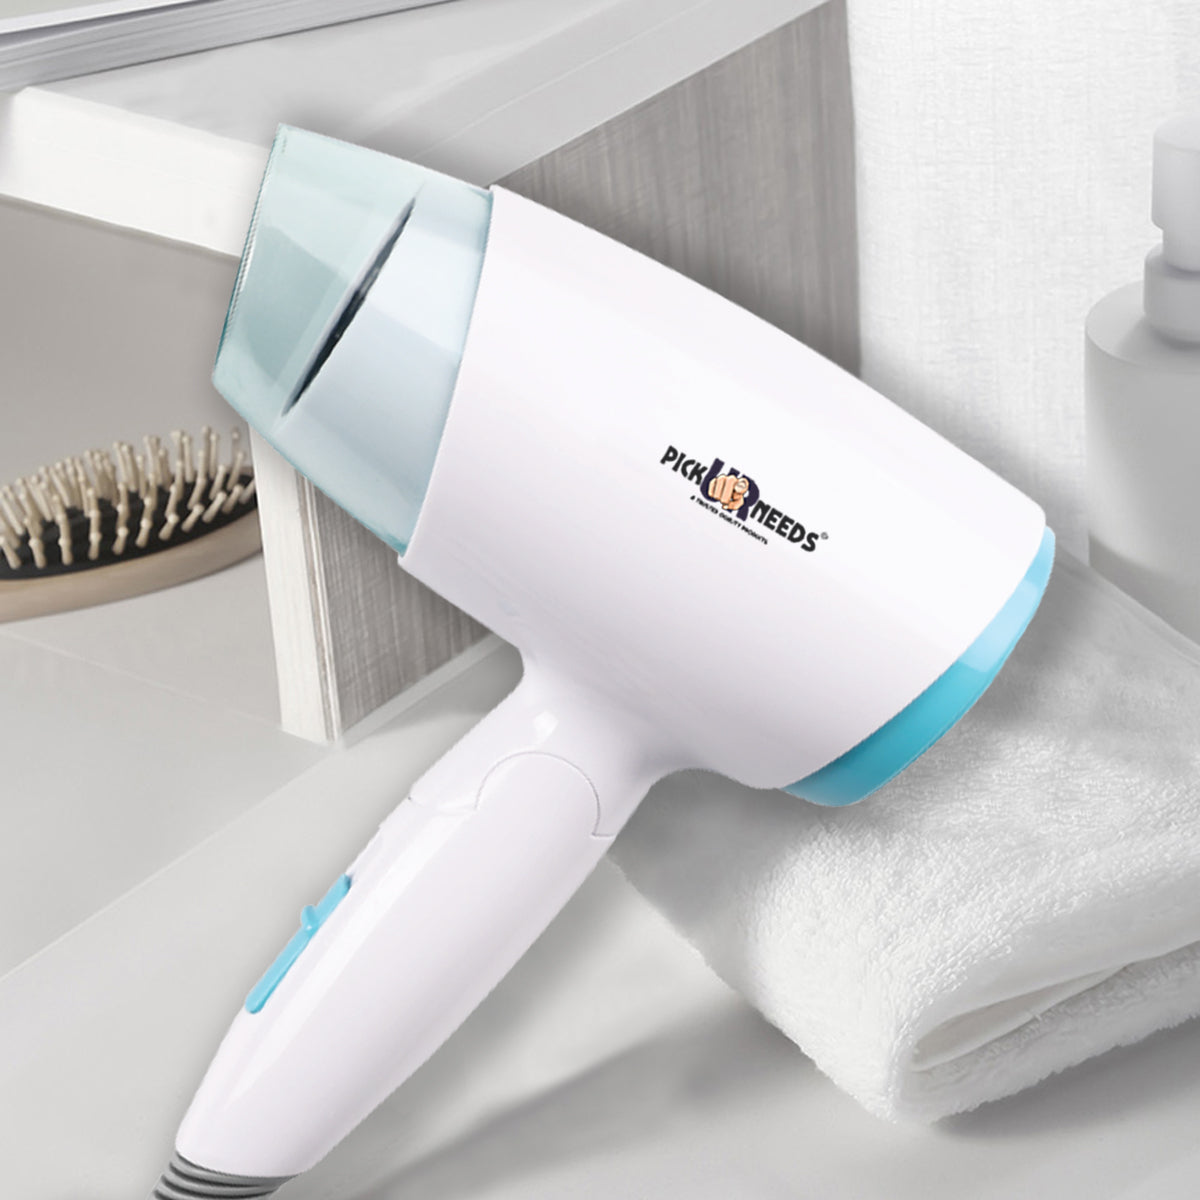 Pick Ur Needs® 3500W Portable Powerful Professional Hair Dryer with Folding Handle